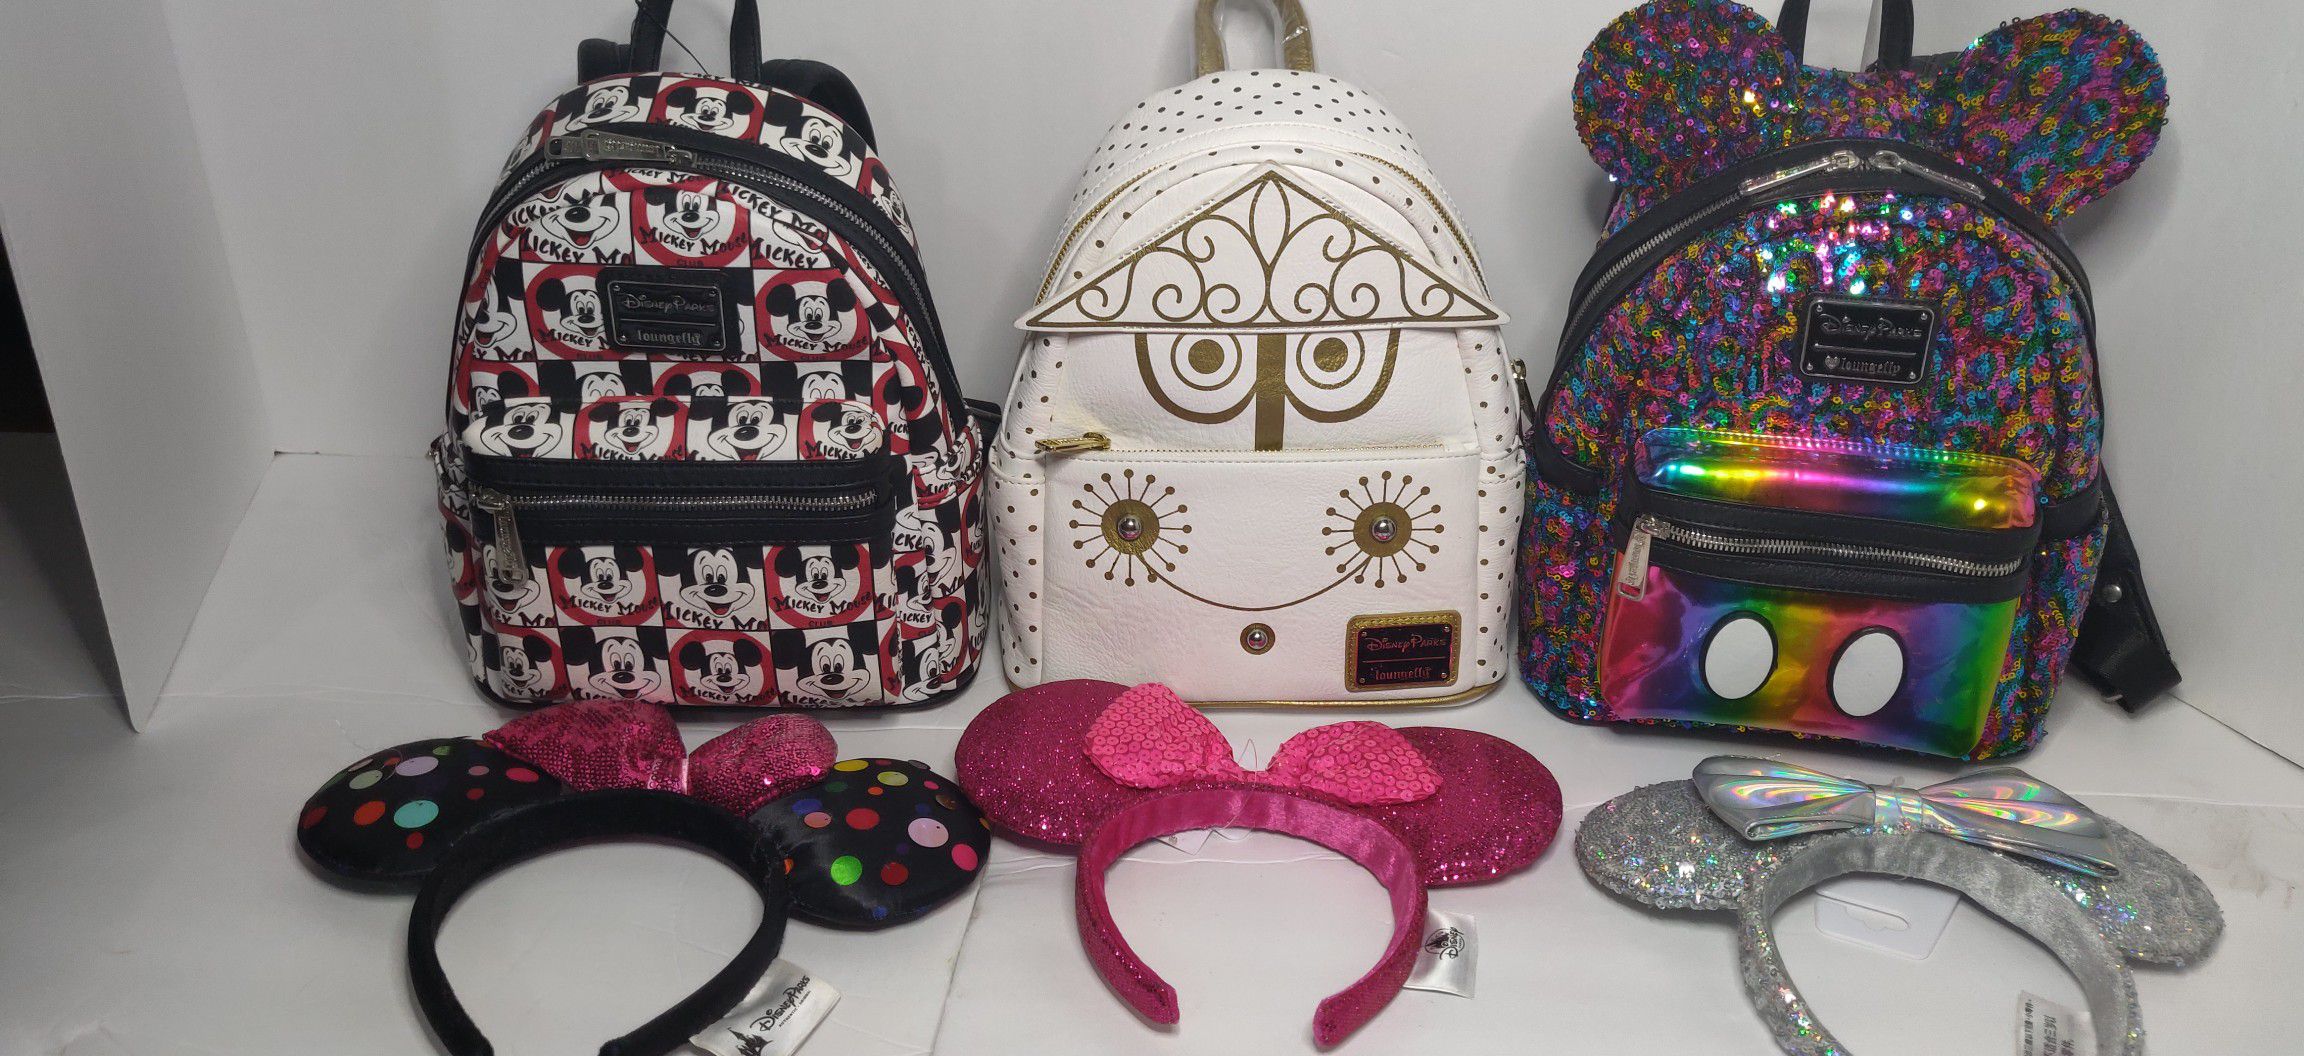 Disney loungefly collaboration mini backpack and Minnie mouse ears